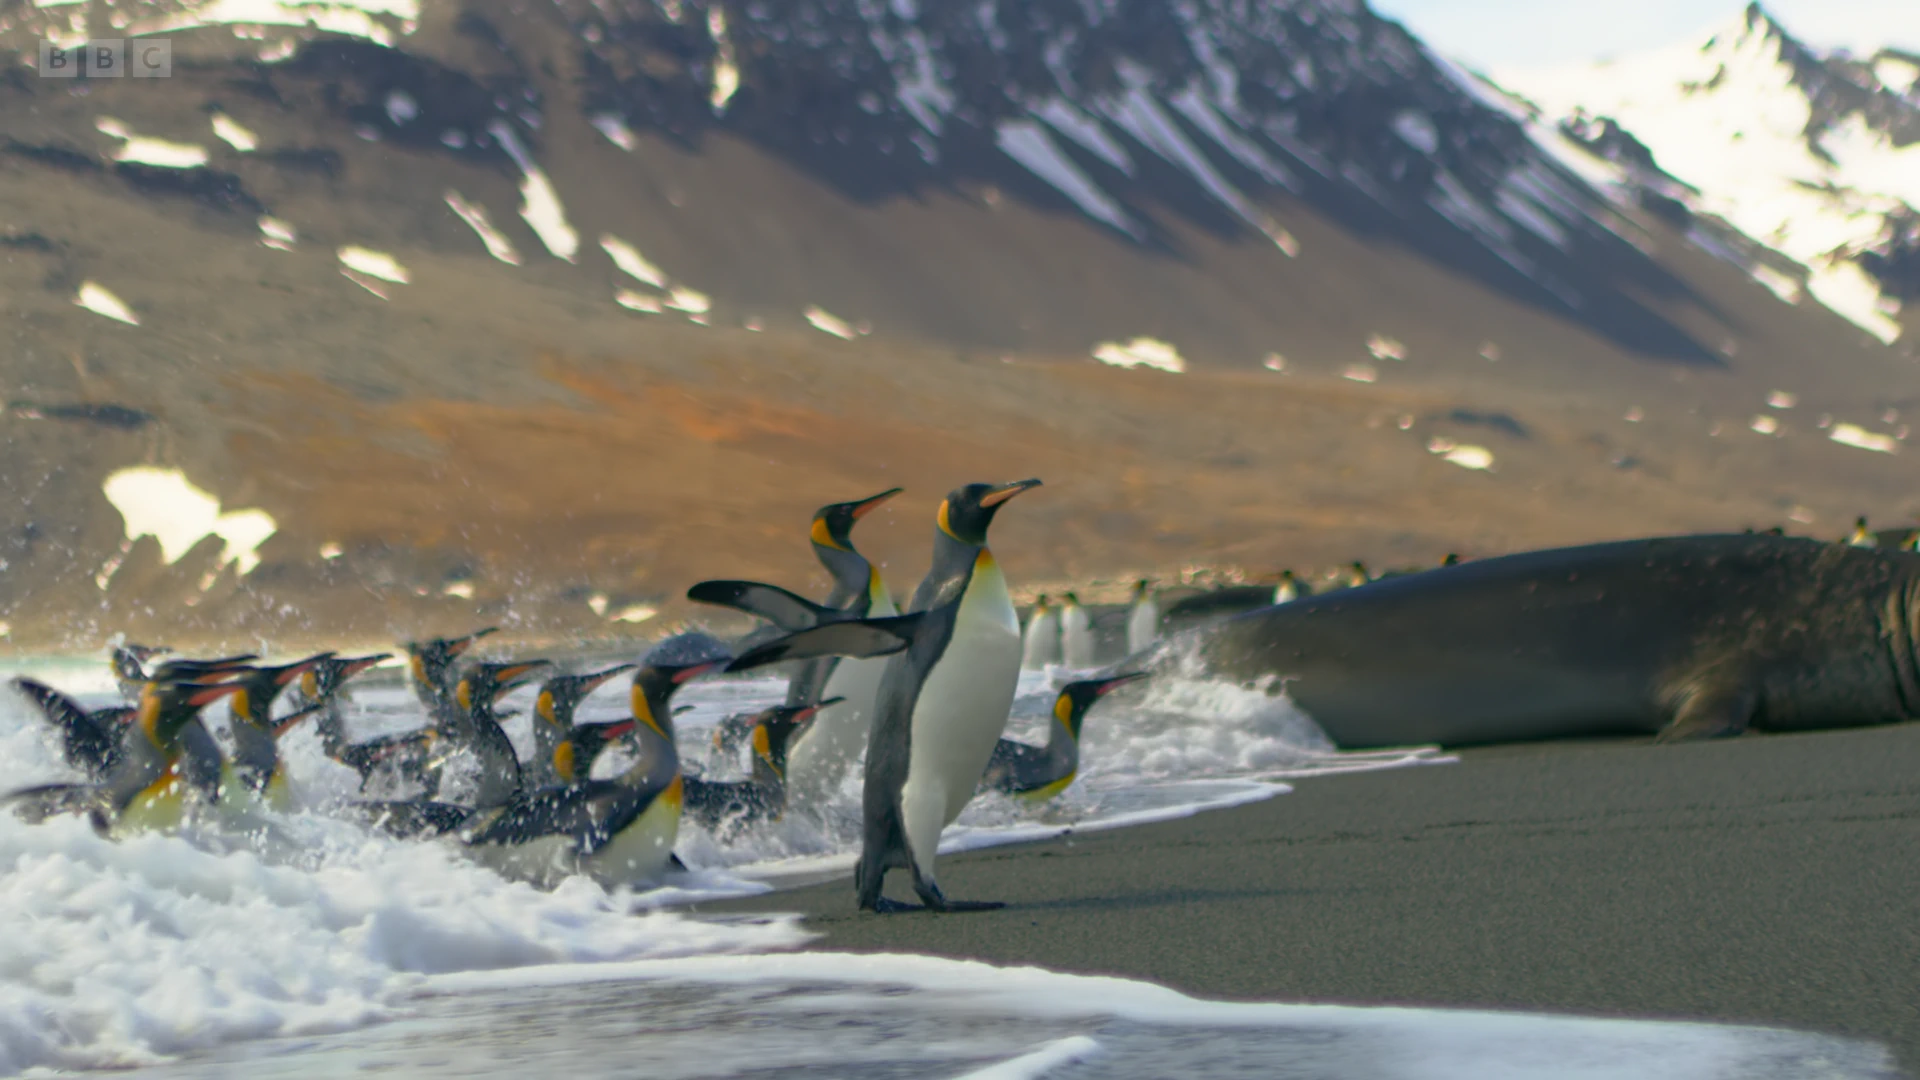 King penguin (Aptenodytes patagonicus patagonicus) as shown in Seven Worlds, One Planet - Antarctica